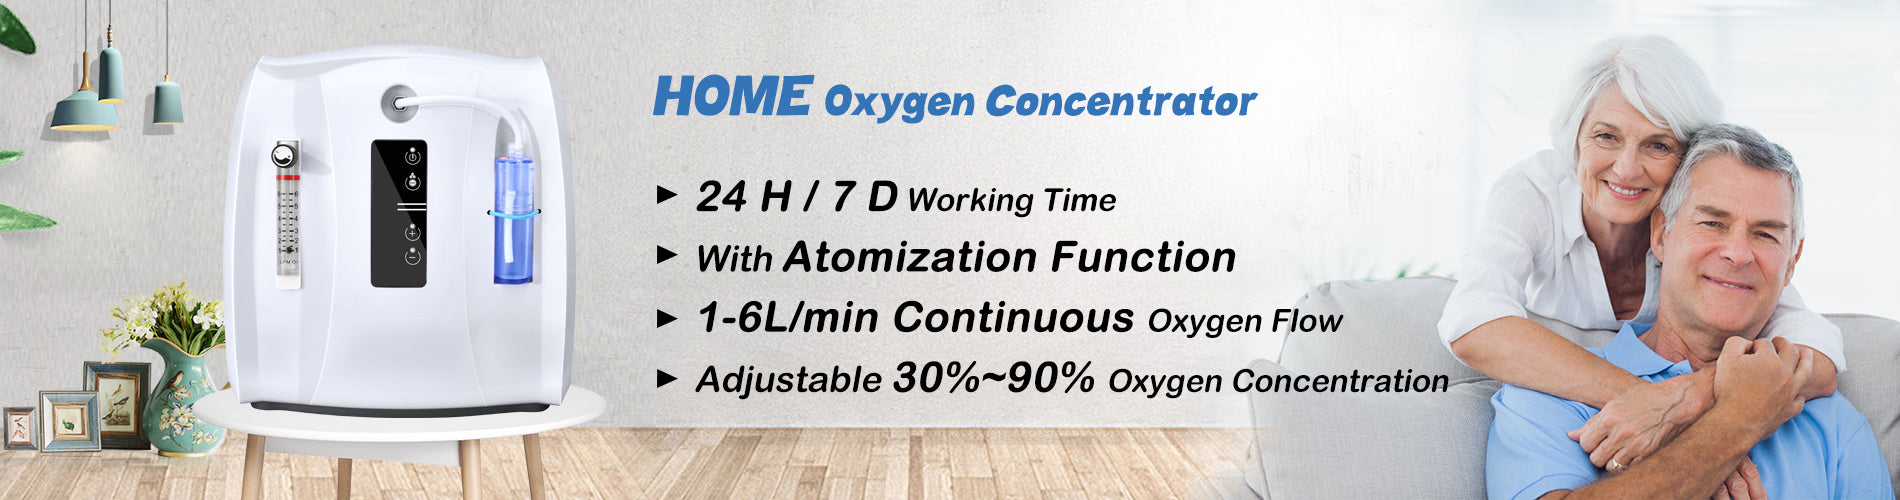 MAF015AW home oxygen concentrator-oxygensolve